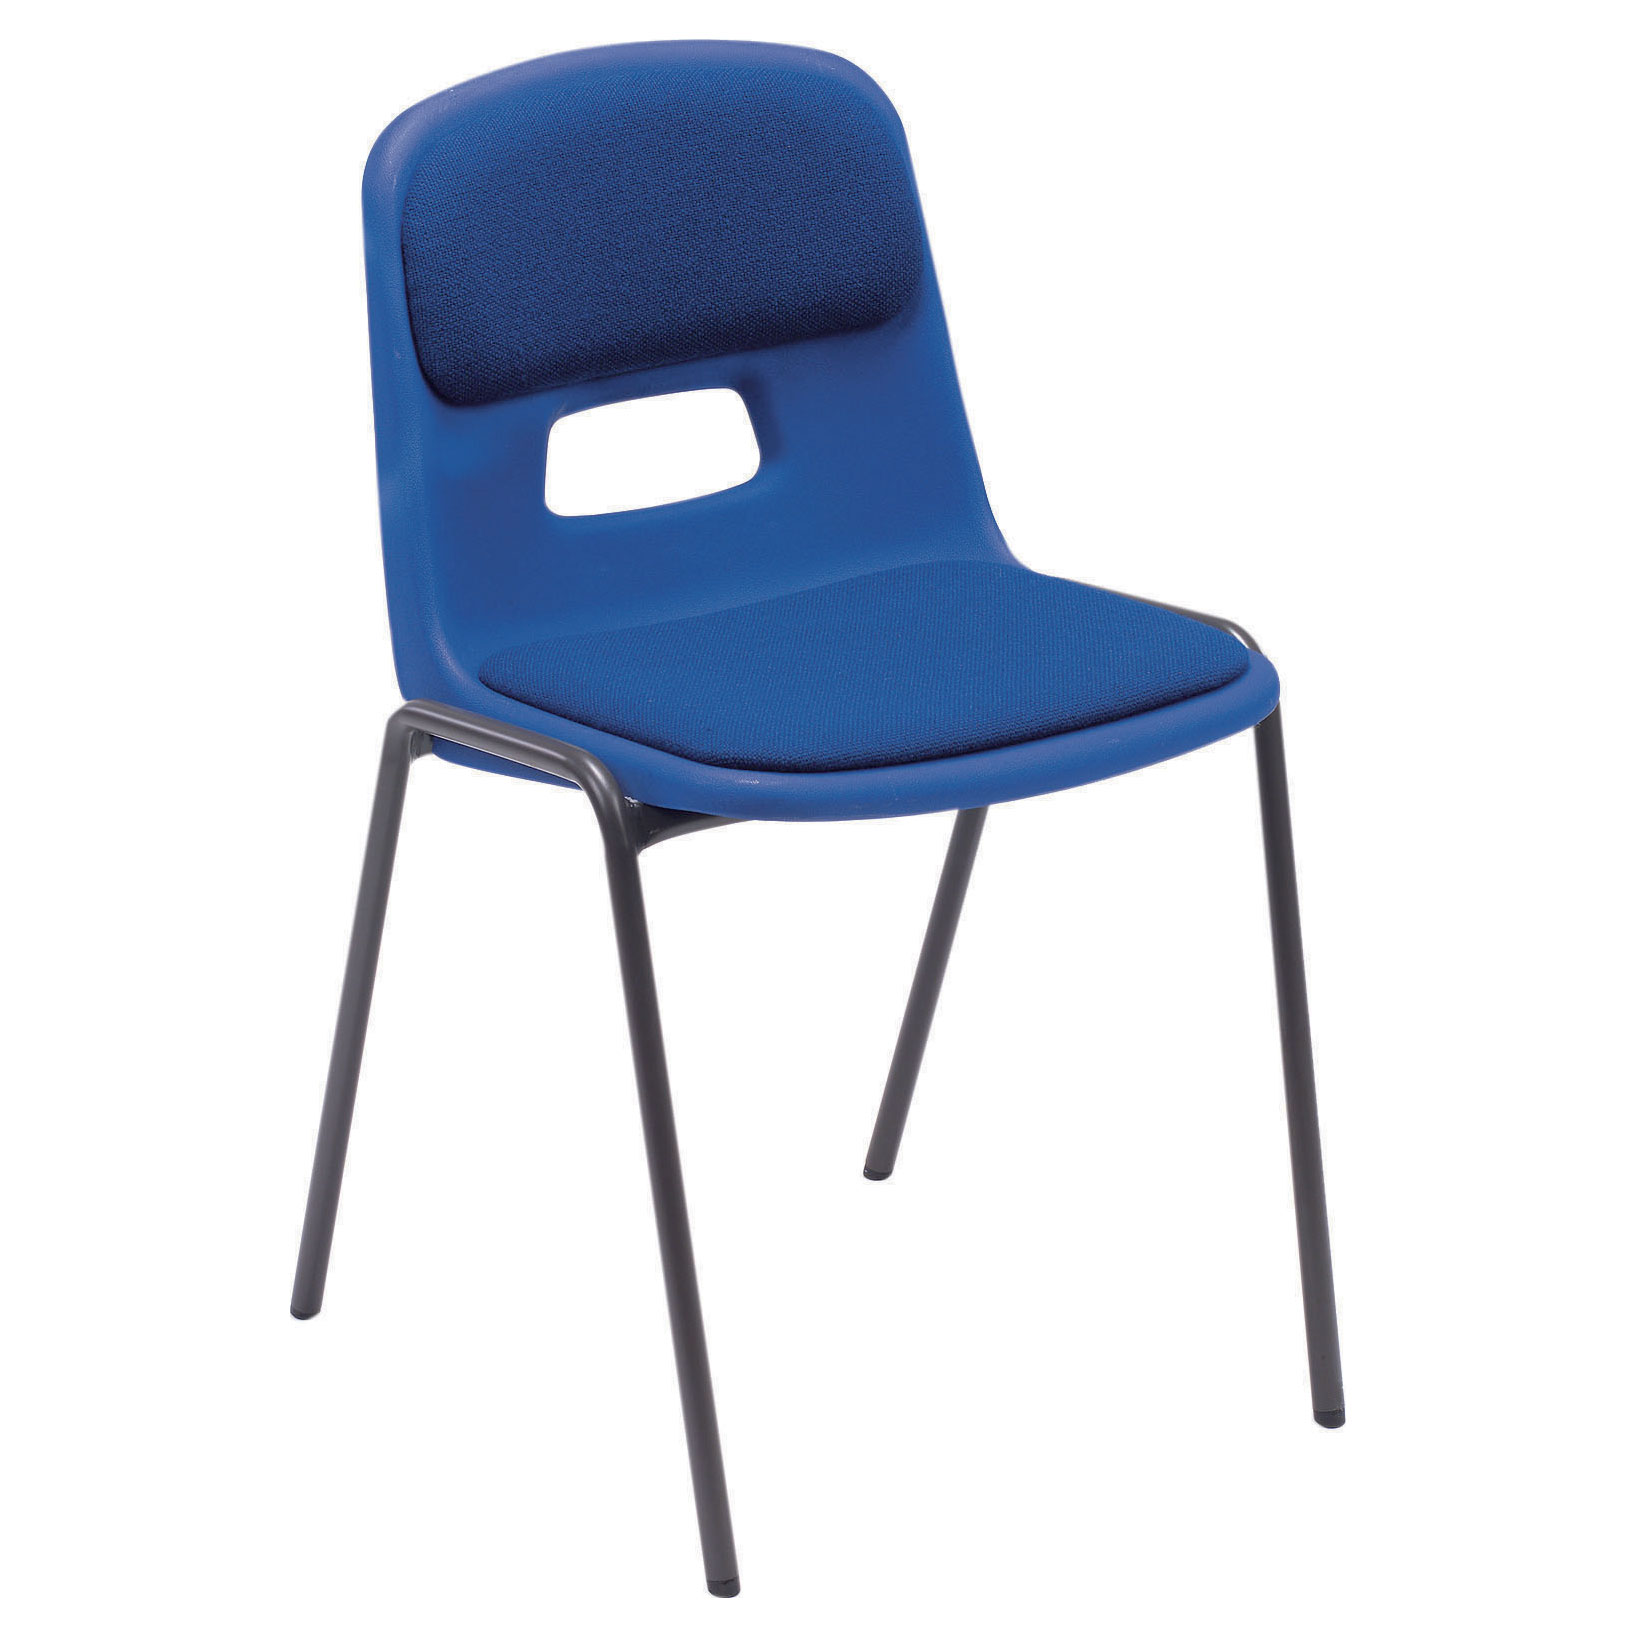 Remploy GH20 Classic School Chair + Seat & Back Pad